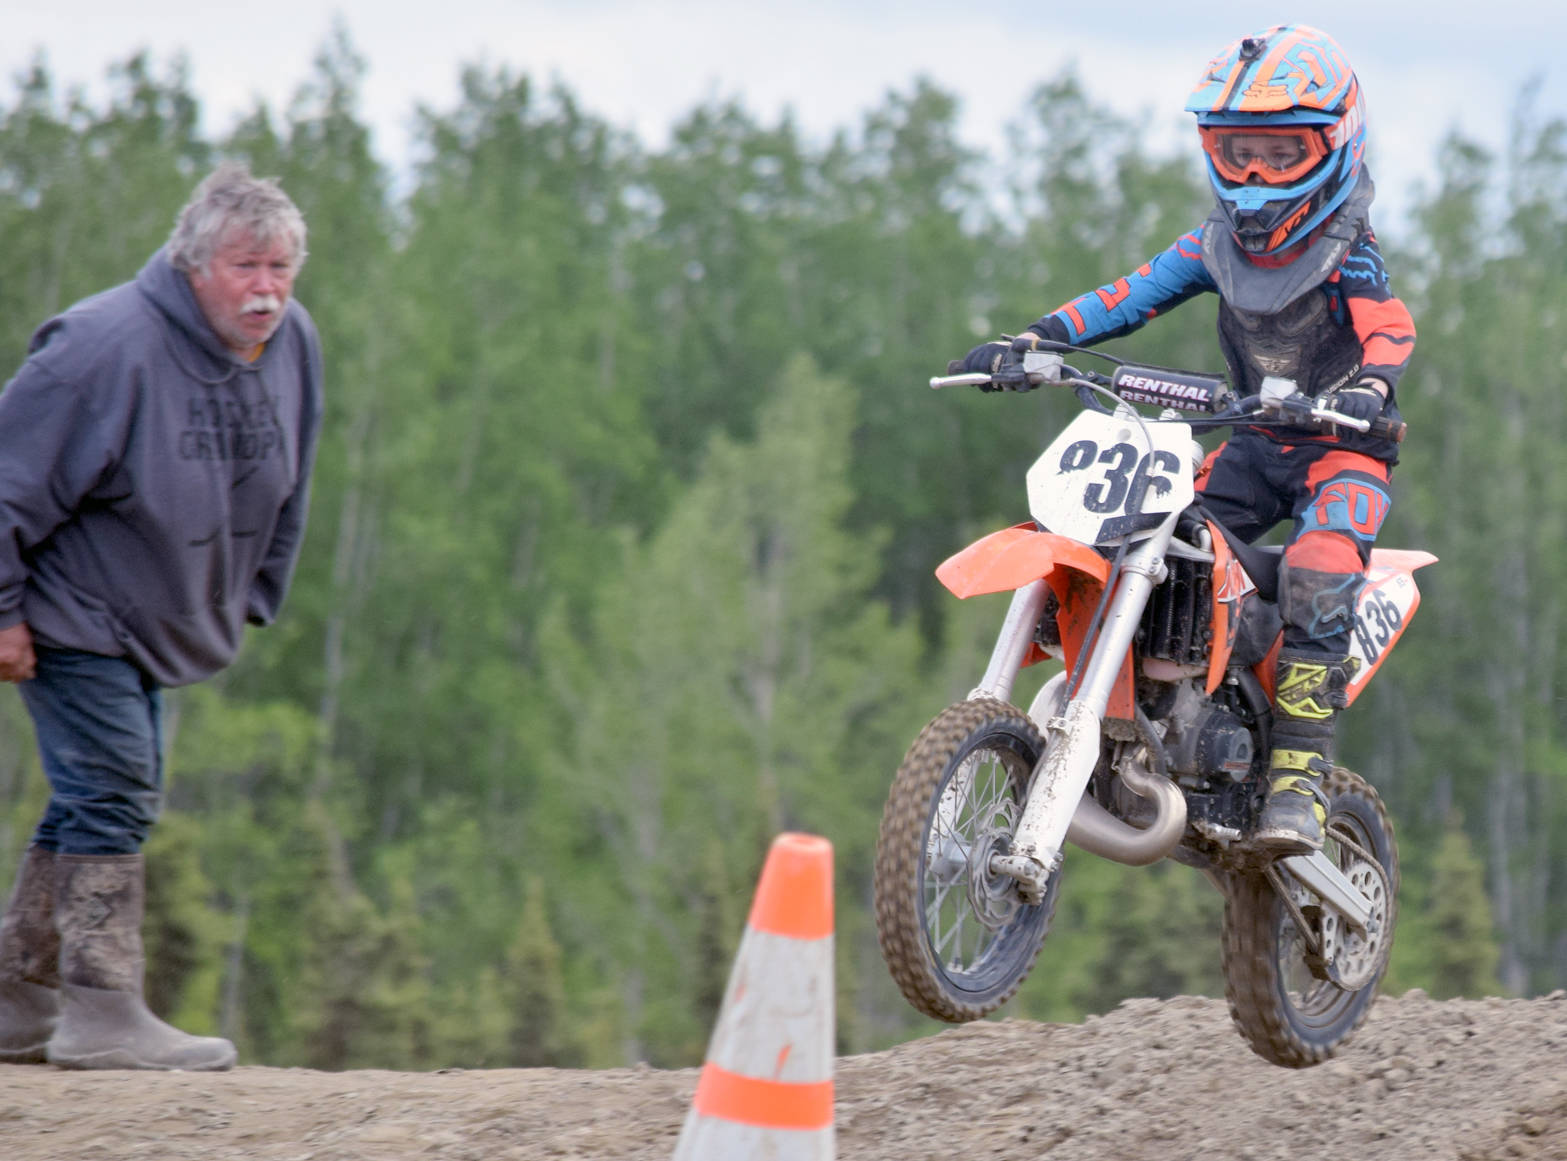 John Mullican, of Soldotna, cheers on his grandson, Draiden, in the 65cc Novice race at the Alaska State Motocross Championships at Twin City Raceway on Sunday, June 17, 2018.